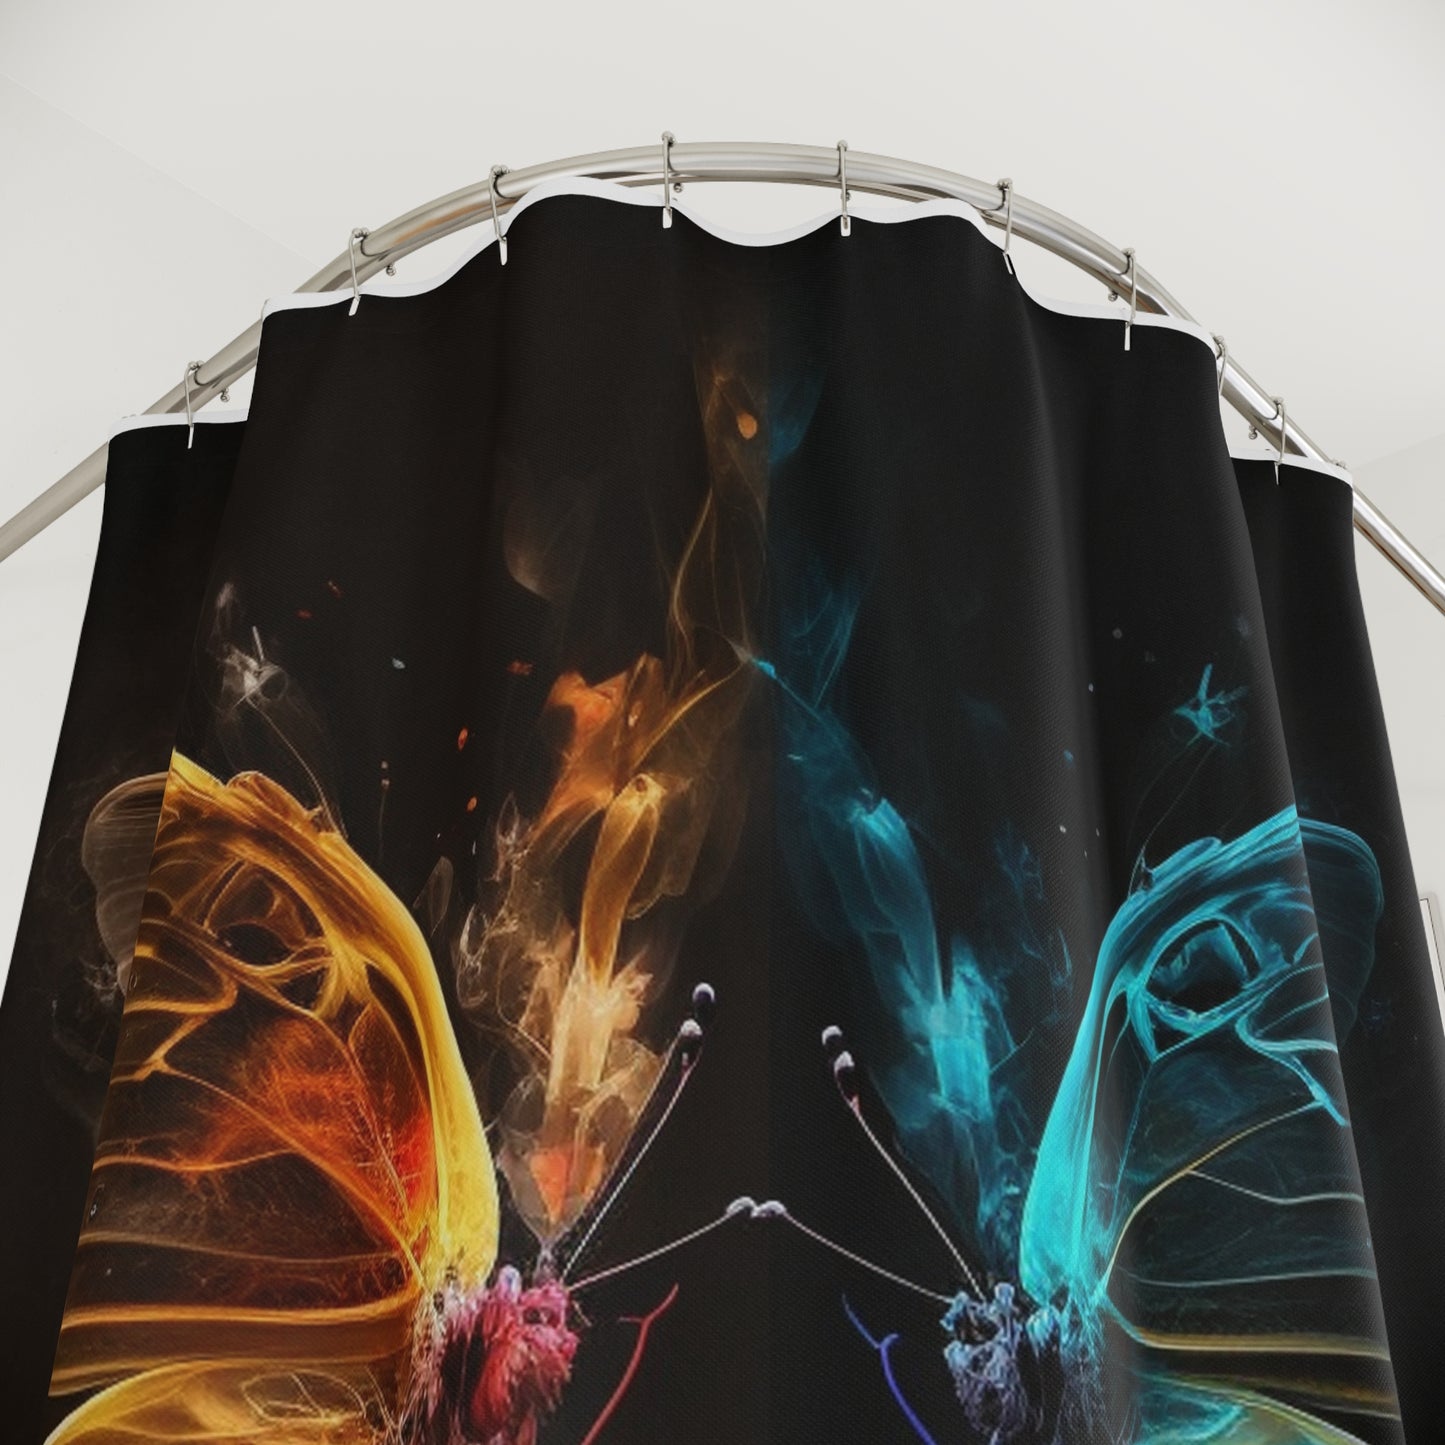 Polyester Shower Curtain Kiss Neon Butterfly 7